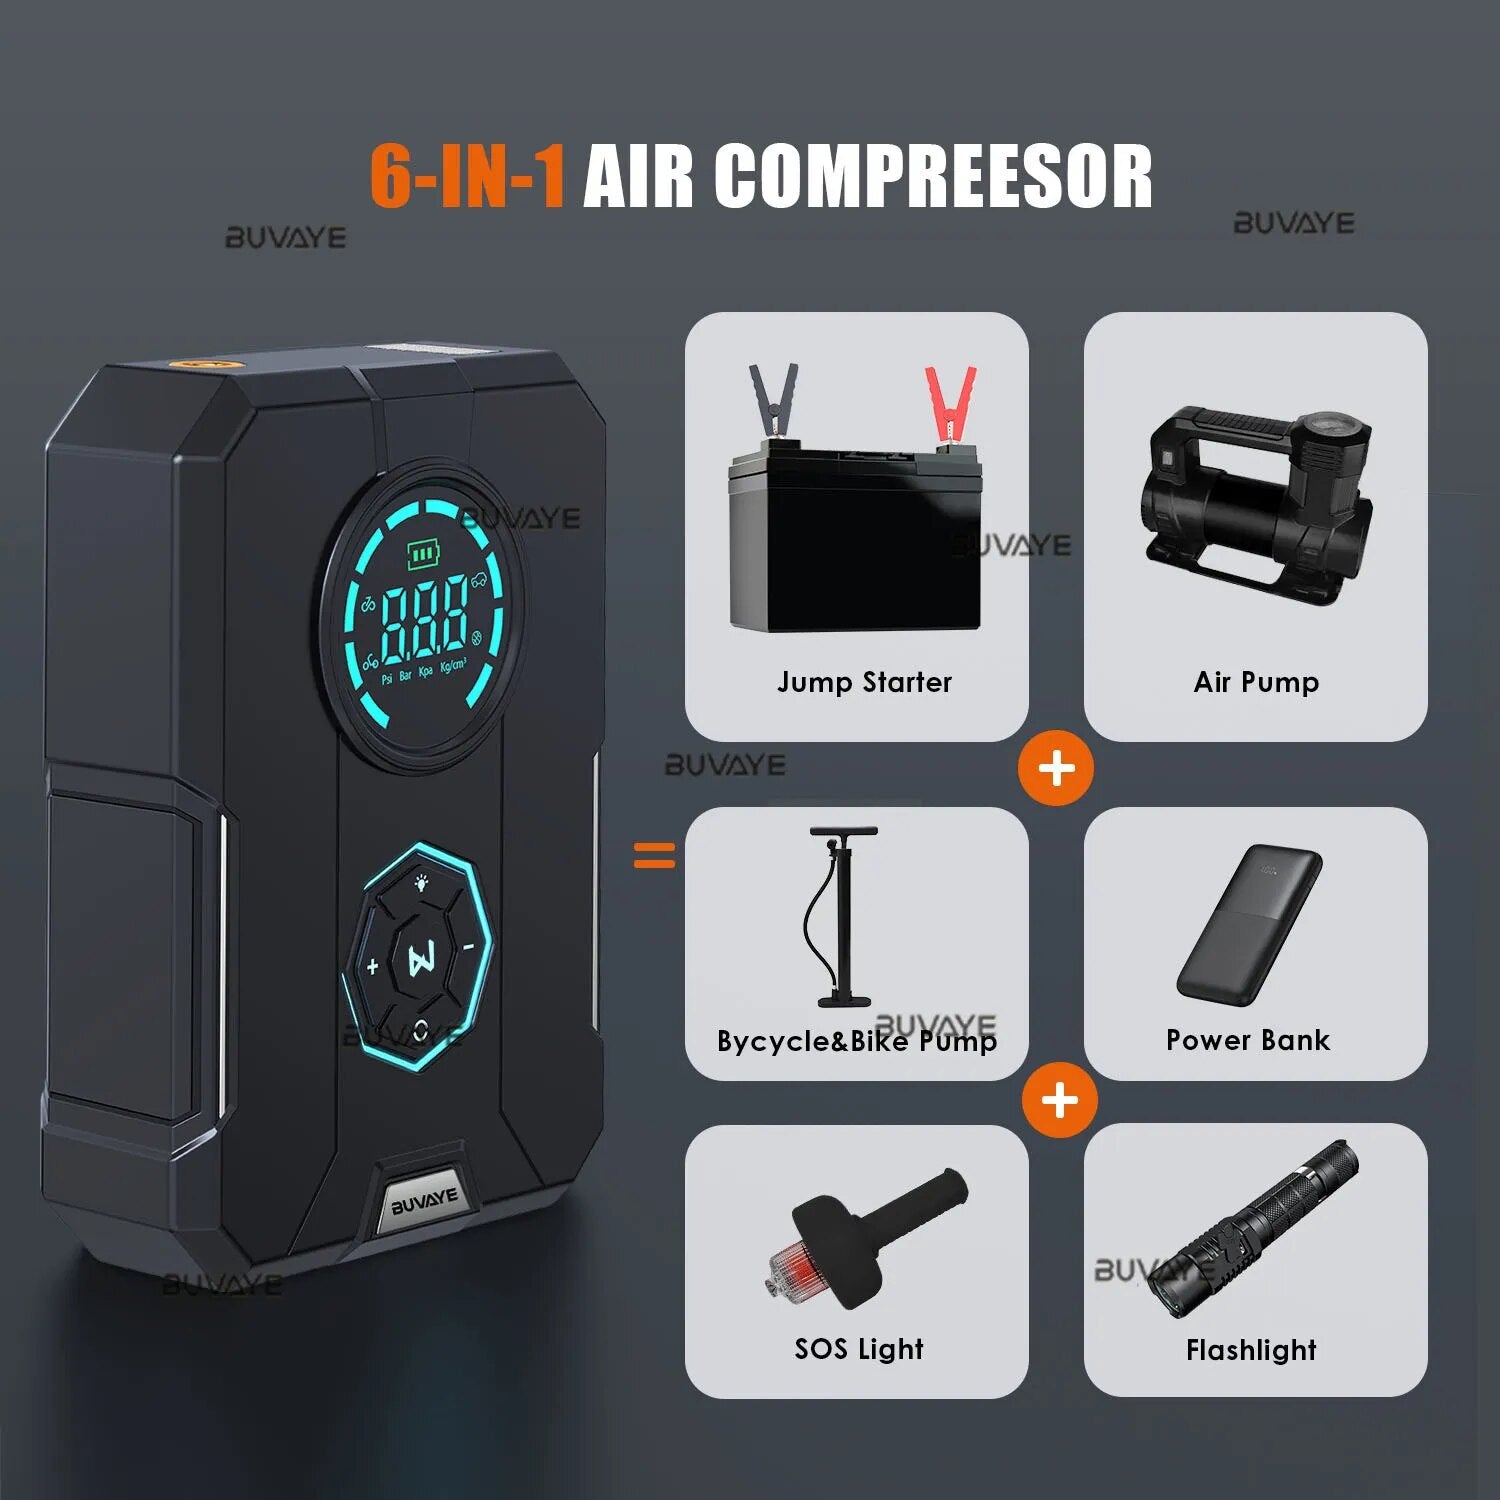 BUVAYE 6 In 1 Car Jump Starter Air Pump Portable Air Compressor Power Bank Cars Battery Starters Starting Auto Tyre Inflator